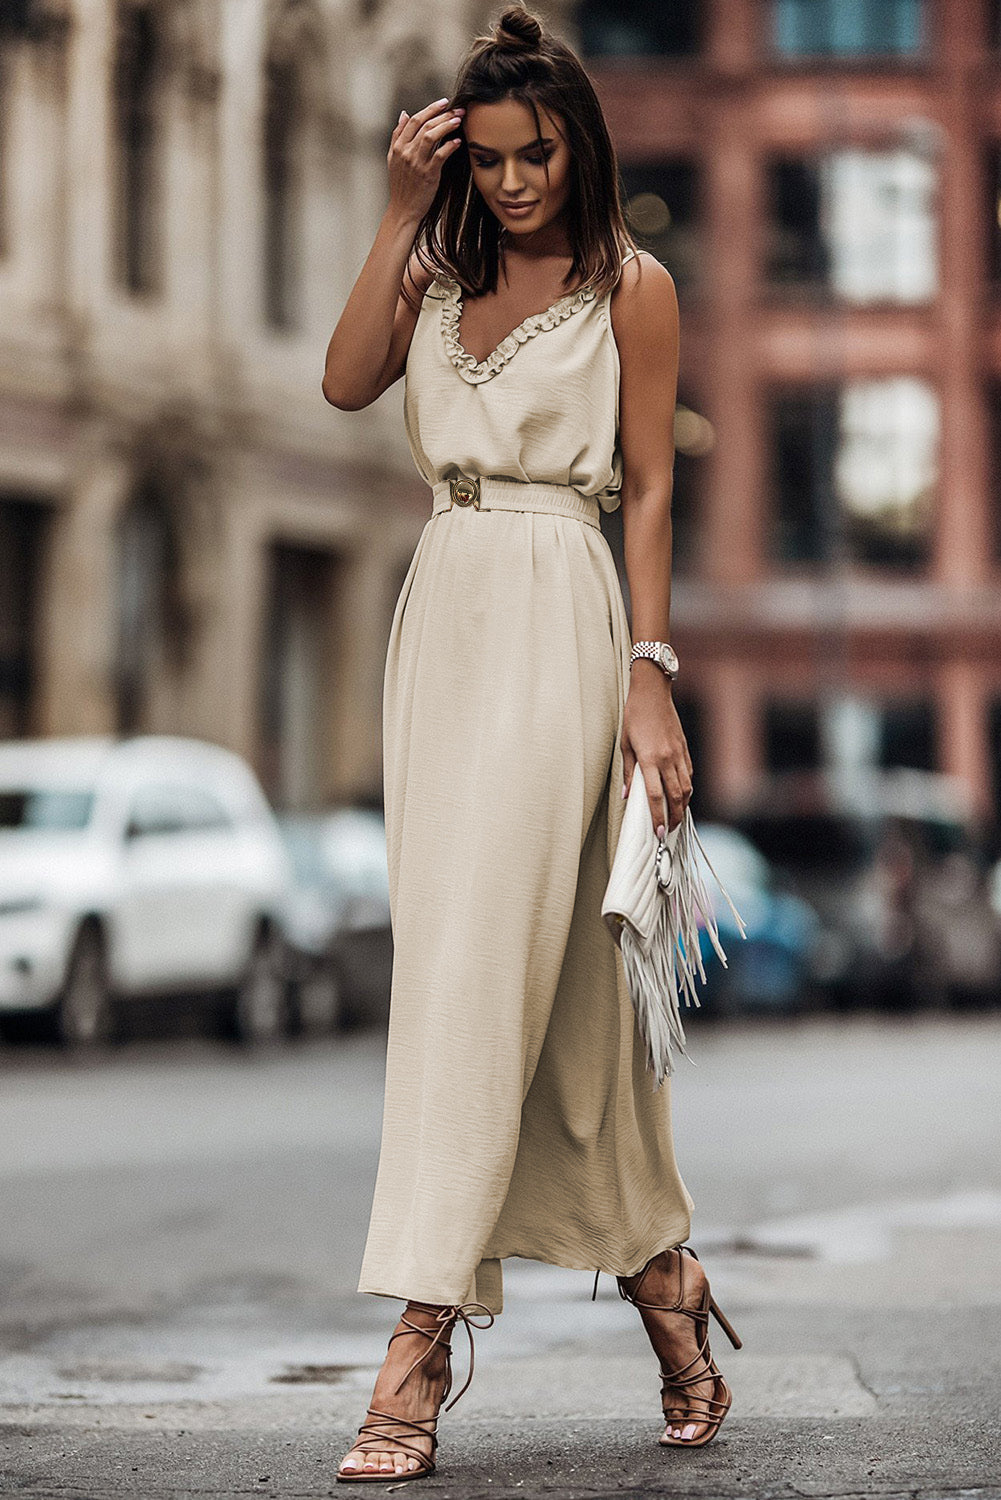 Double V Neck Maxi dress with neckline detail.